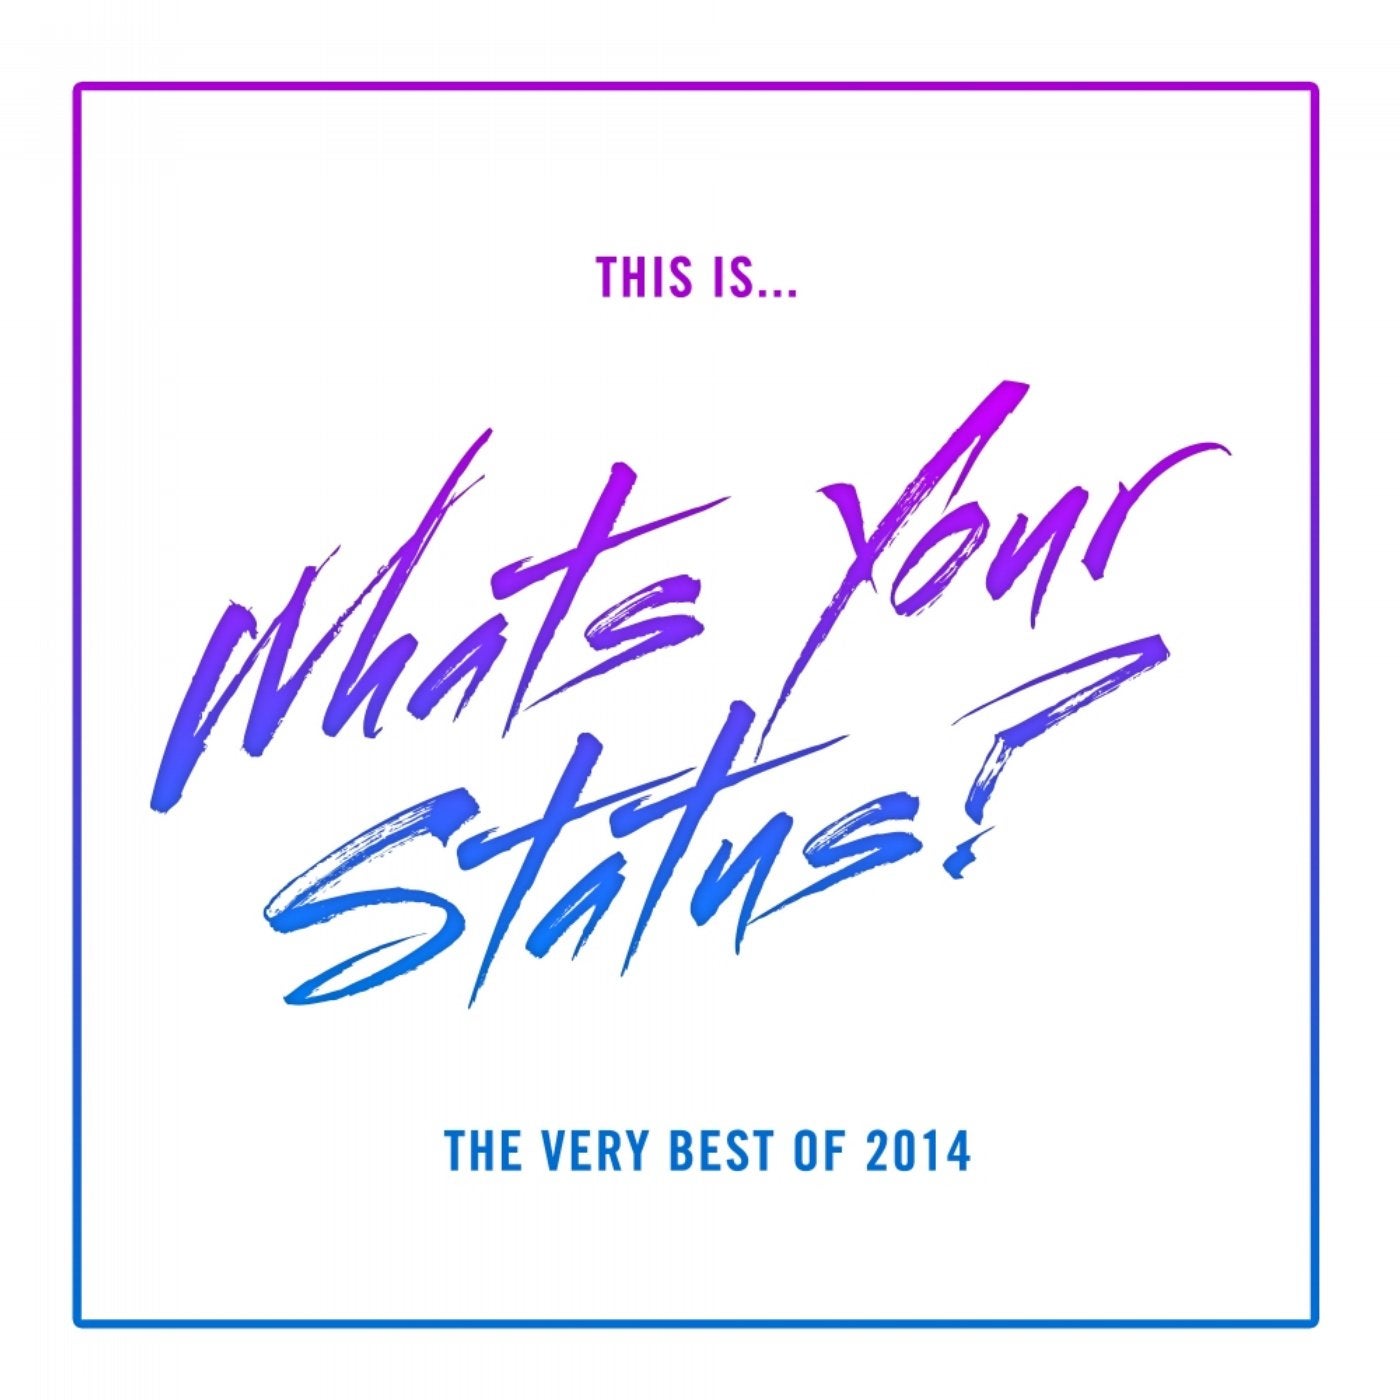 This Is... What's Your Status?, The Very Best Of 2014